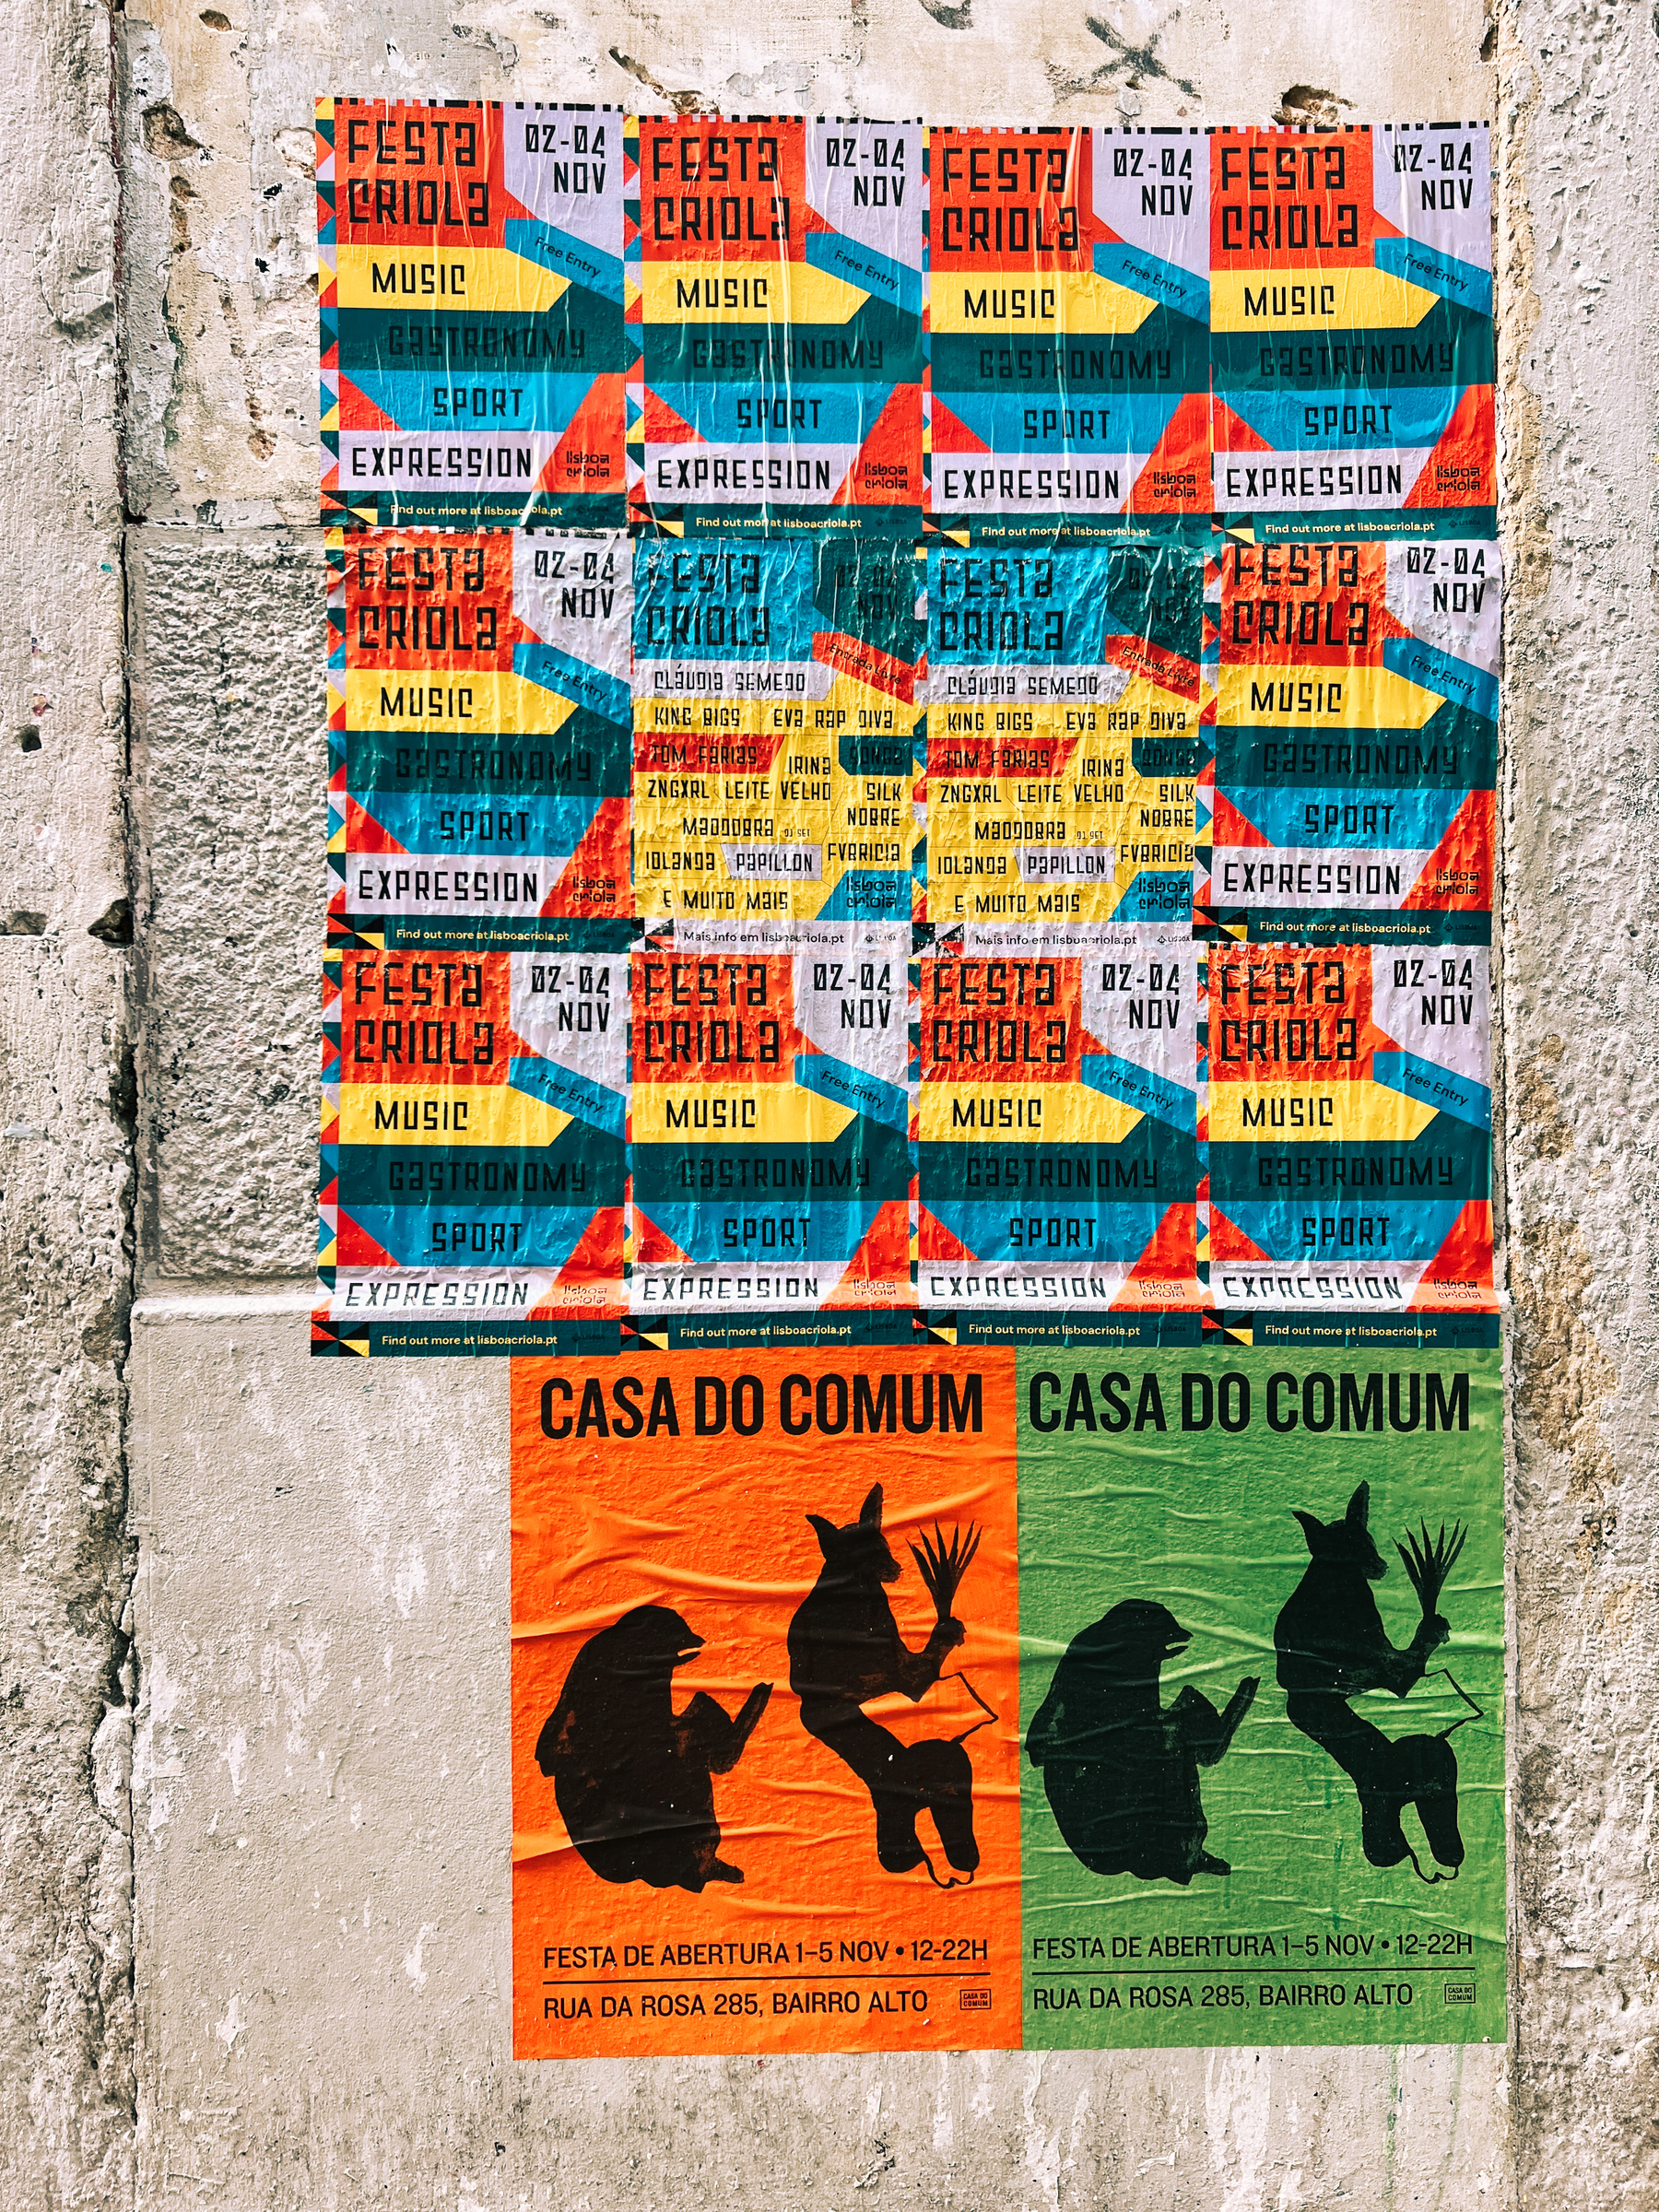 Two “casa do comum” posters. 